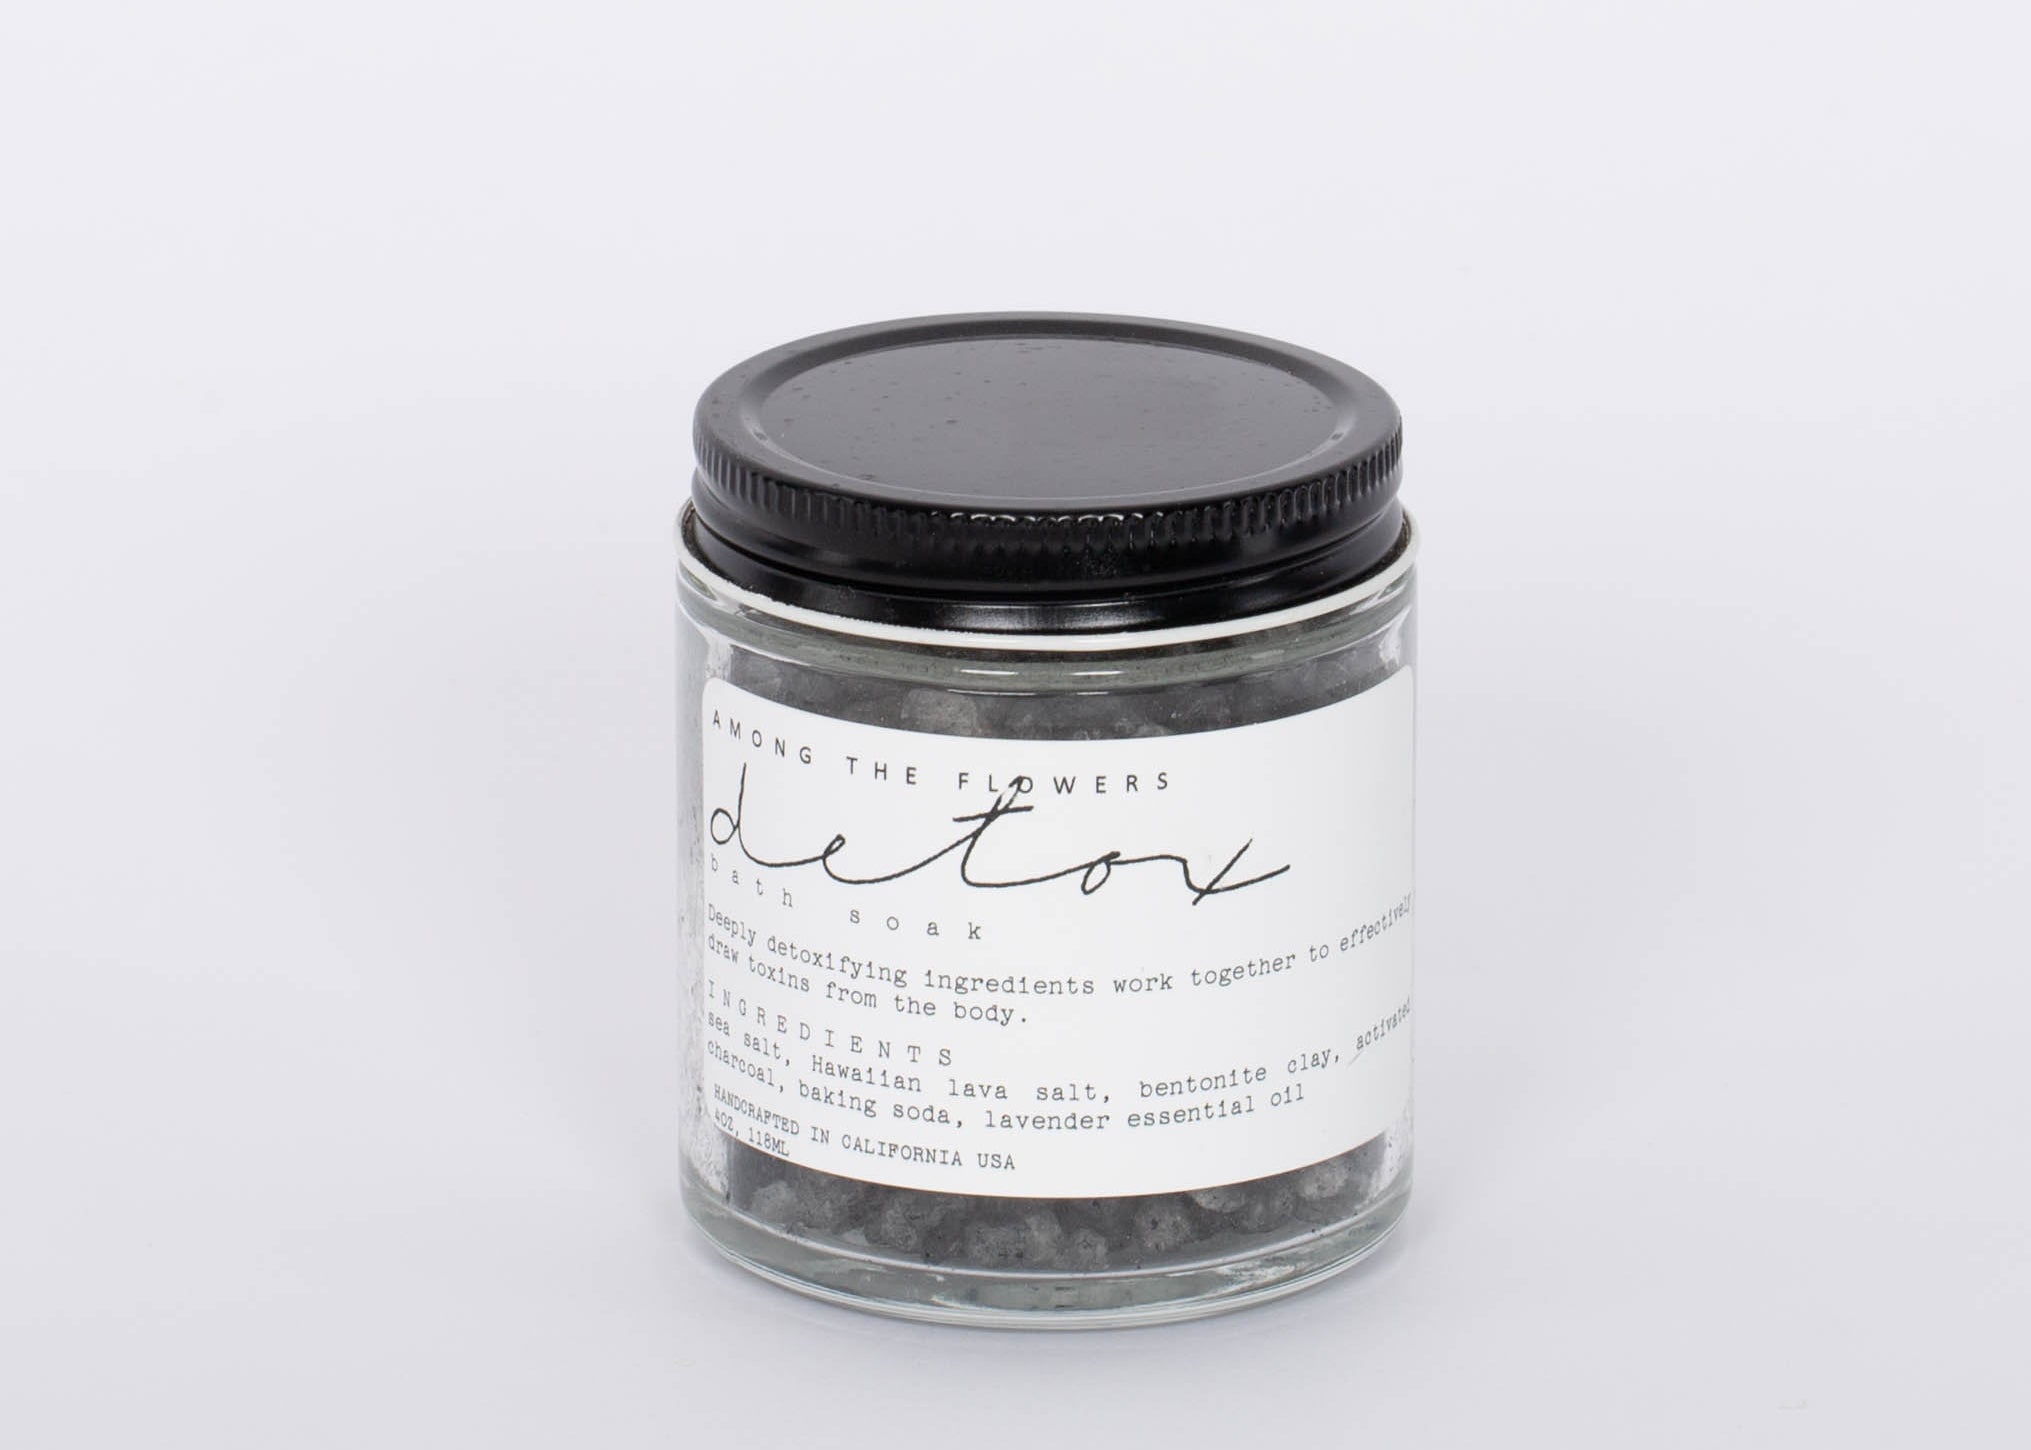 Among the Flowers Detox Bath Soak. D E T O X  A select blend of effective detoxifying agents presents a premium bath for those seeking to cleanse the body from exposure to pollutants. Whether it is diet, environmental, or other toxic exposure, a detoxifying bath with activated charcoal can draw impurities out through its negative charge. 